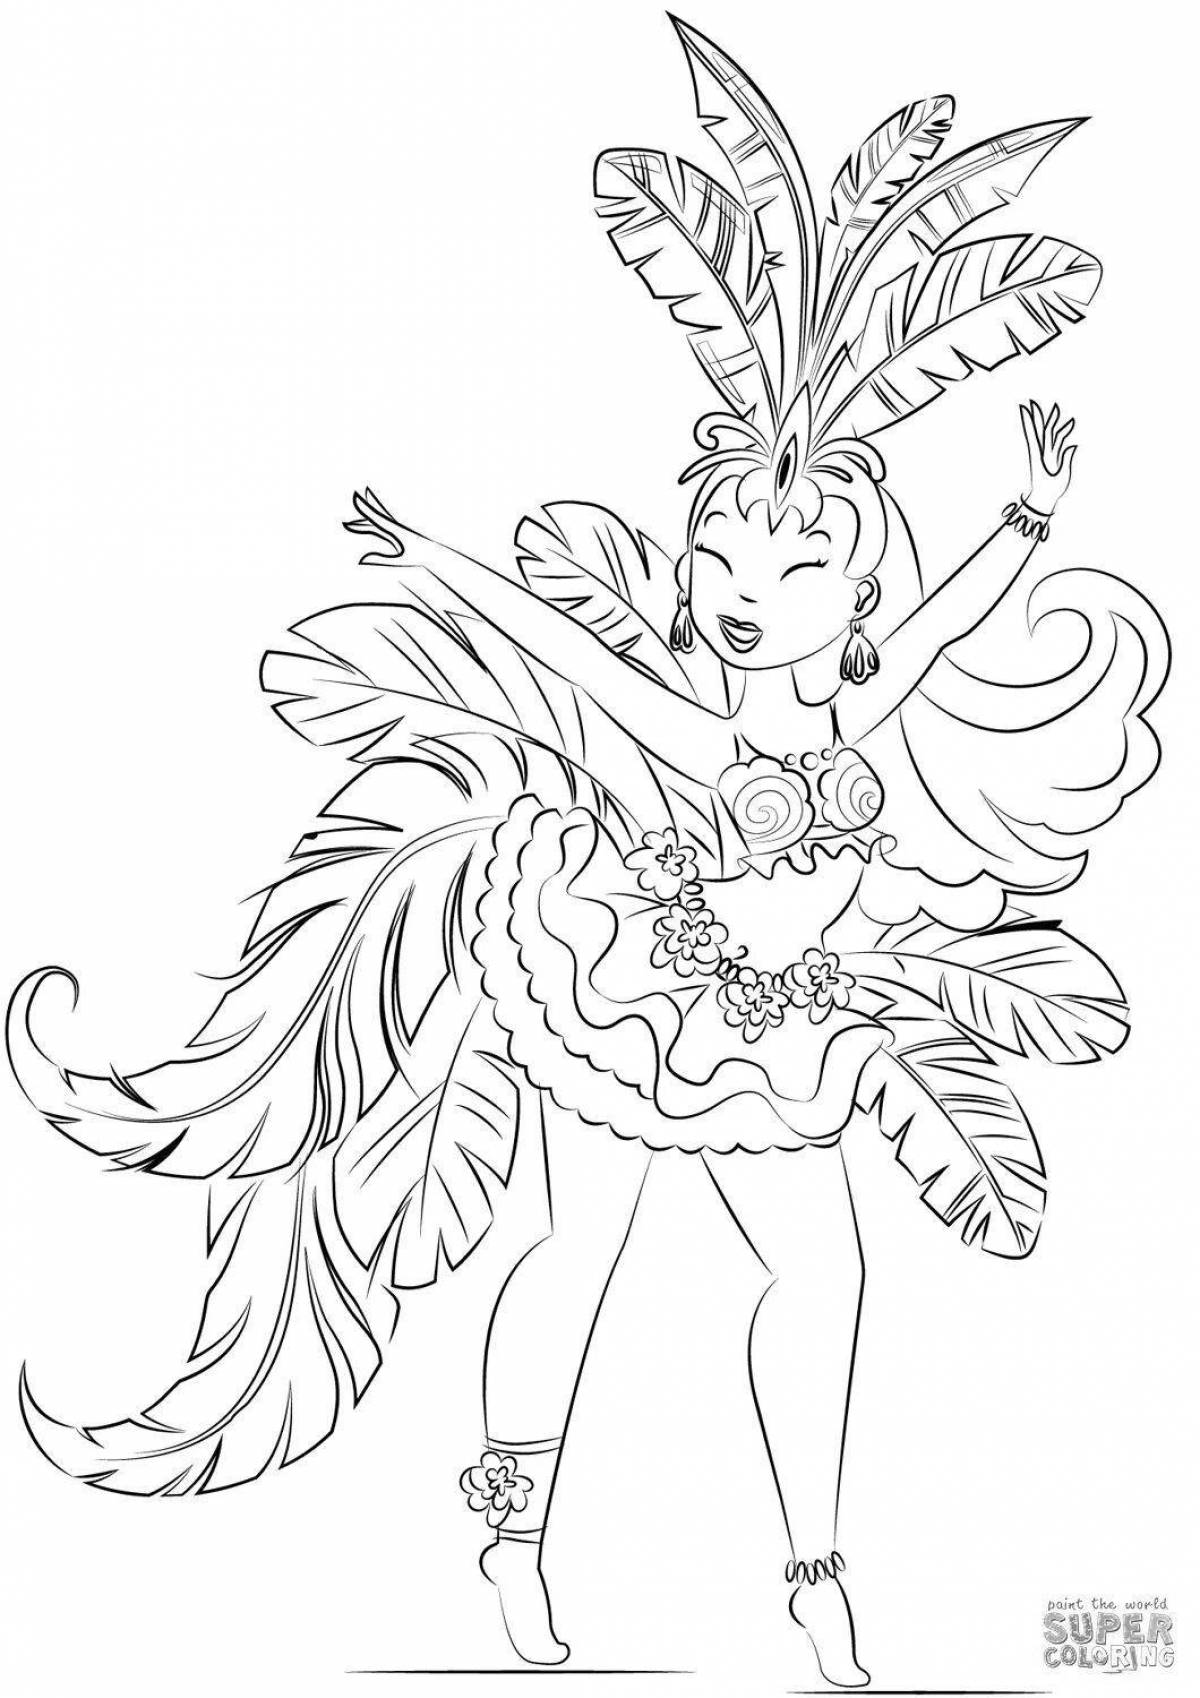 Coloring page dazzling brazil